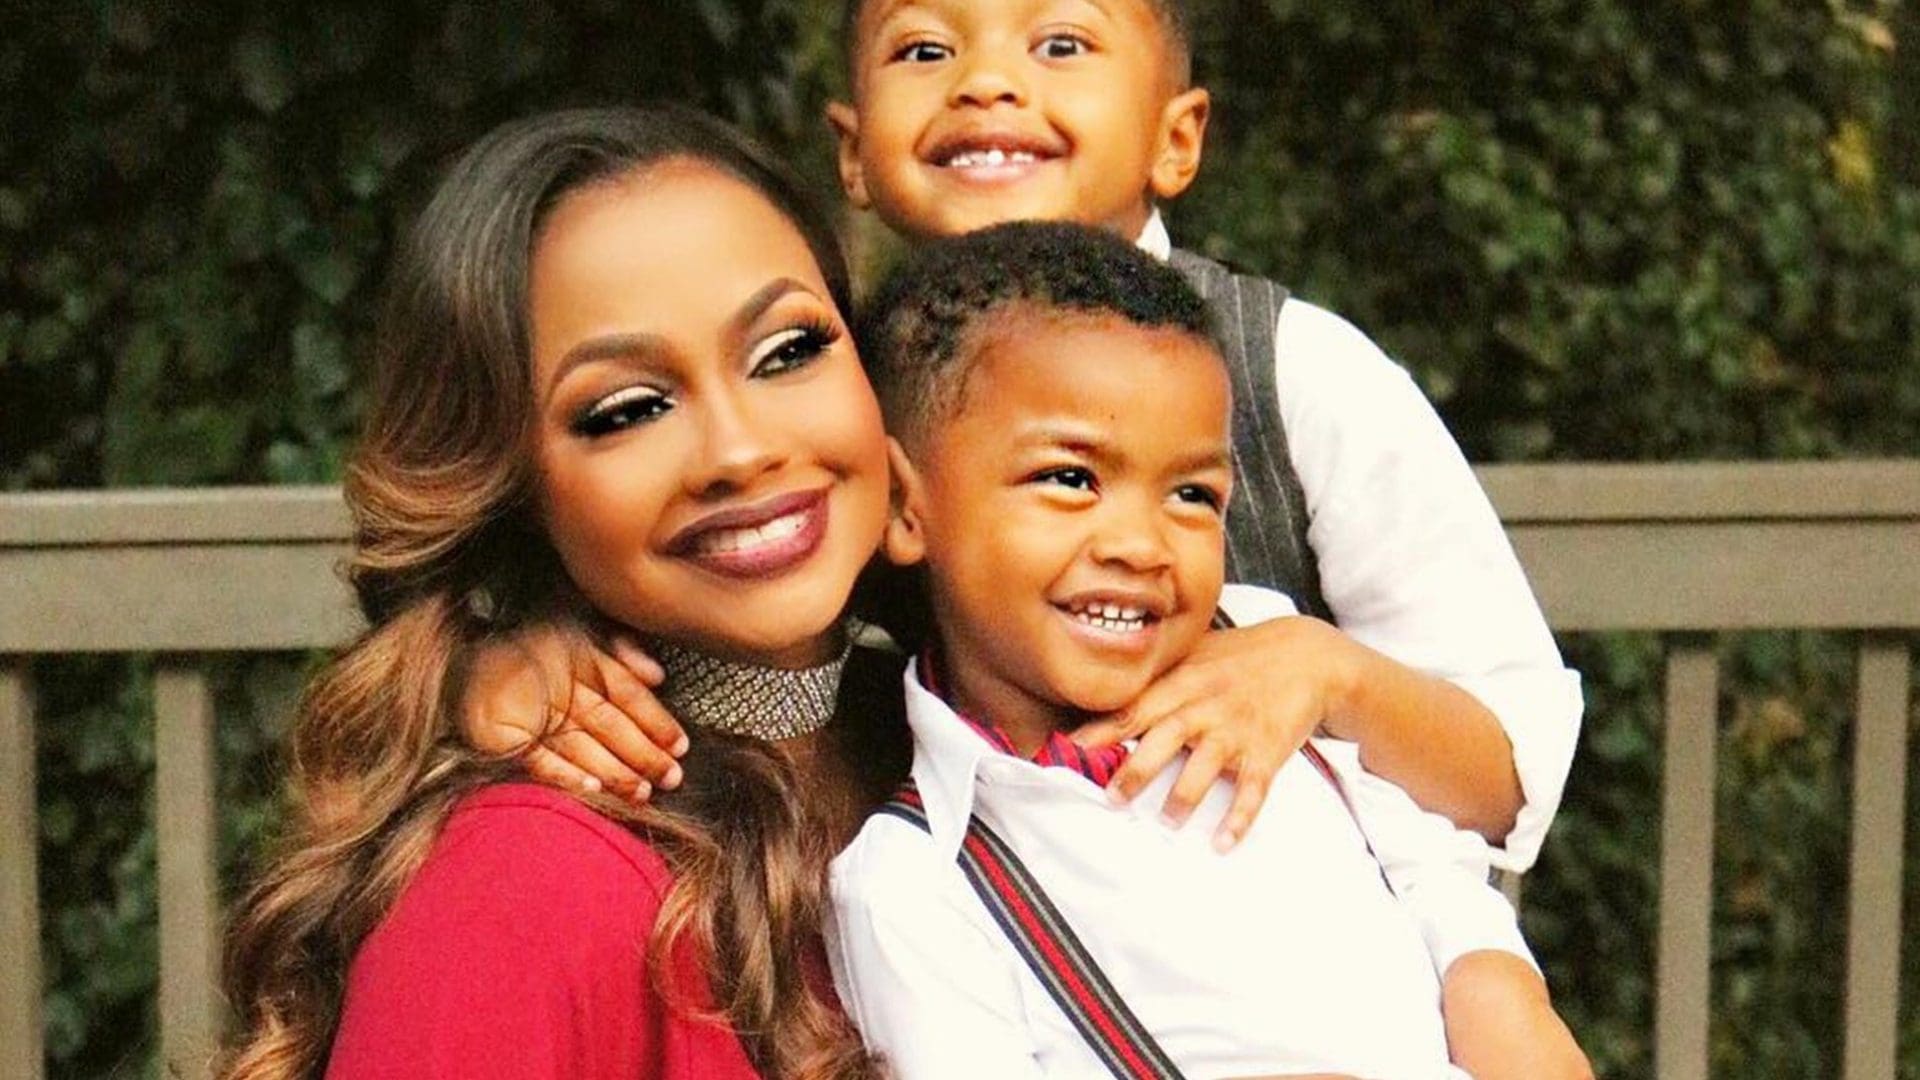 Phaedra Parks Kicks Off 2020 By Spending Some Healing Time - Check Out Her Message To Fans